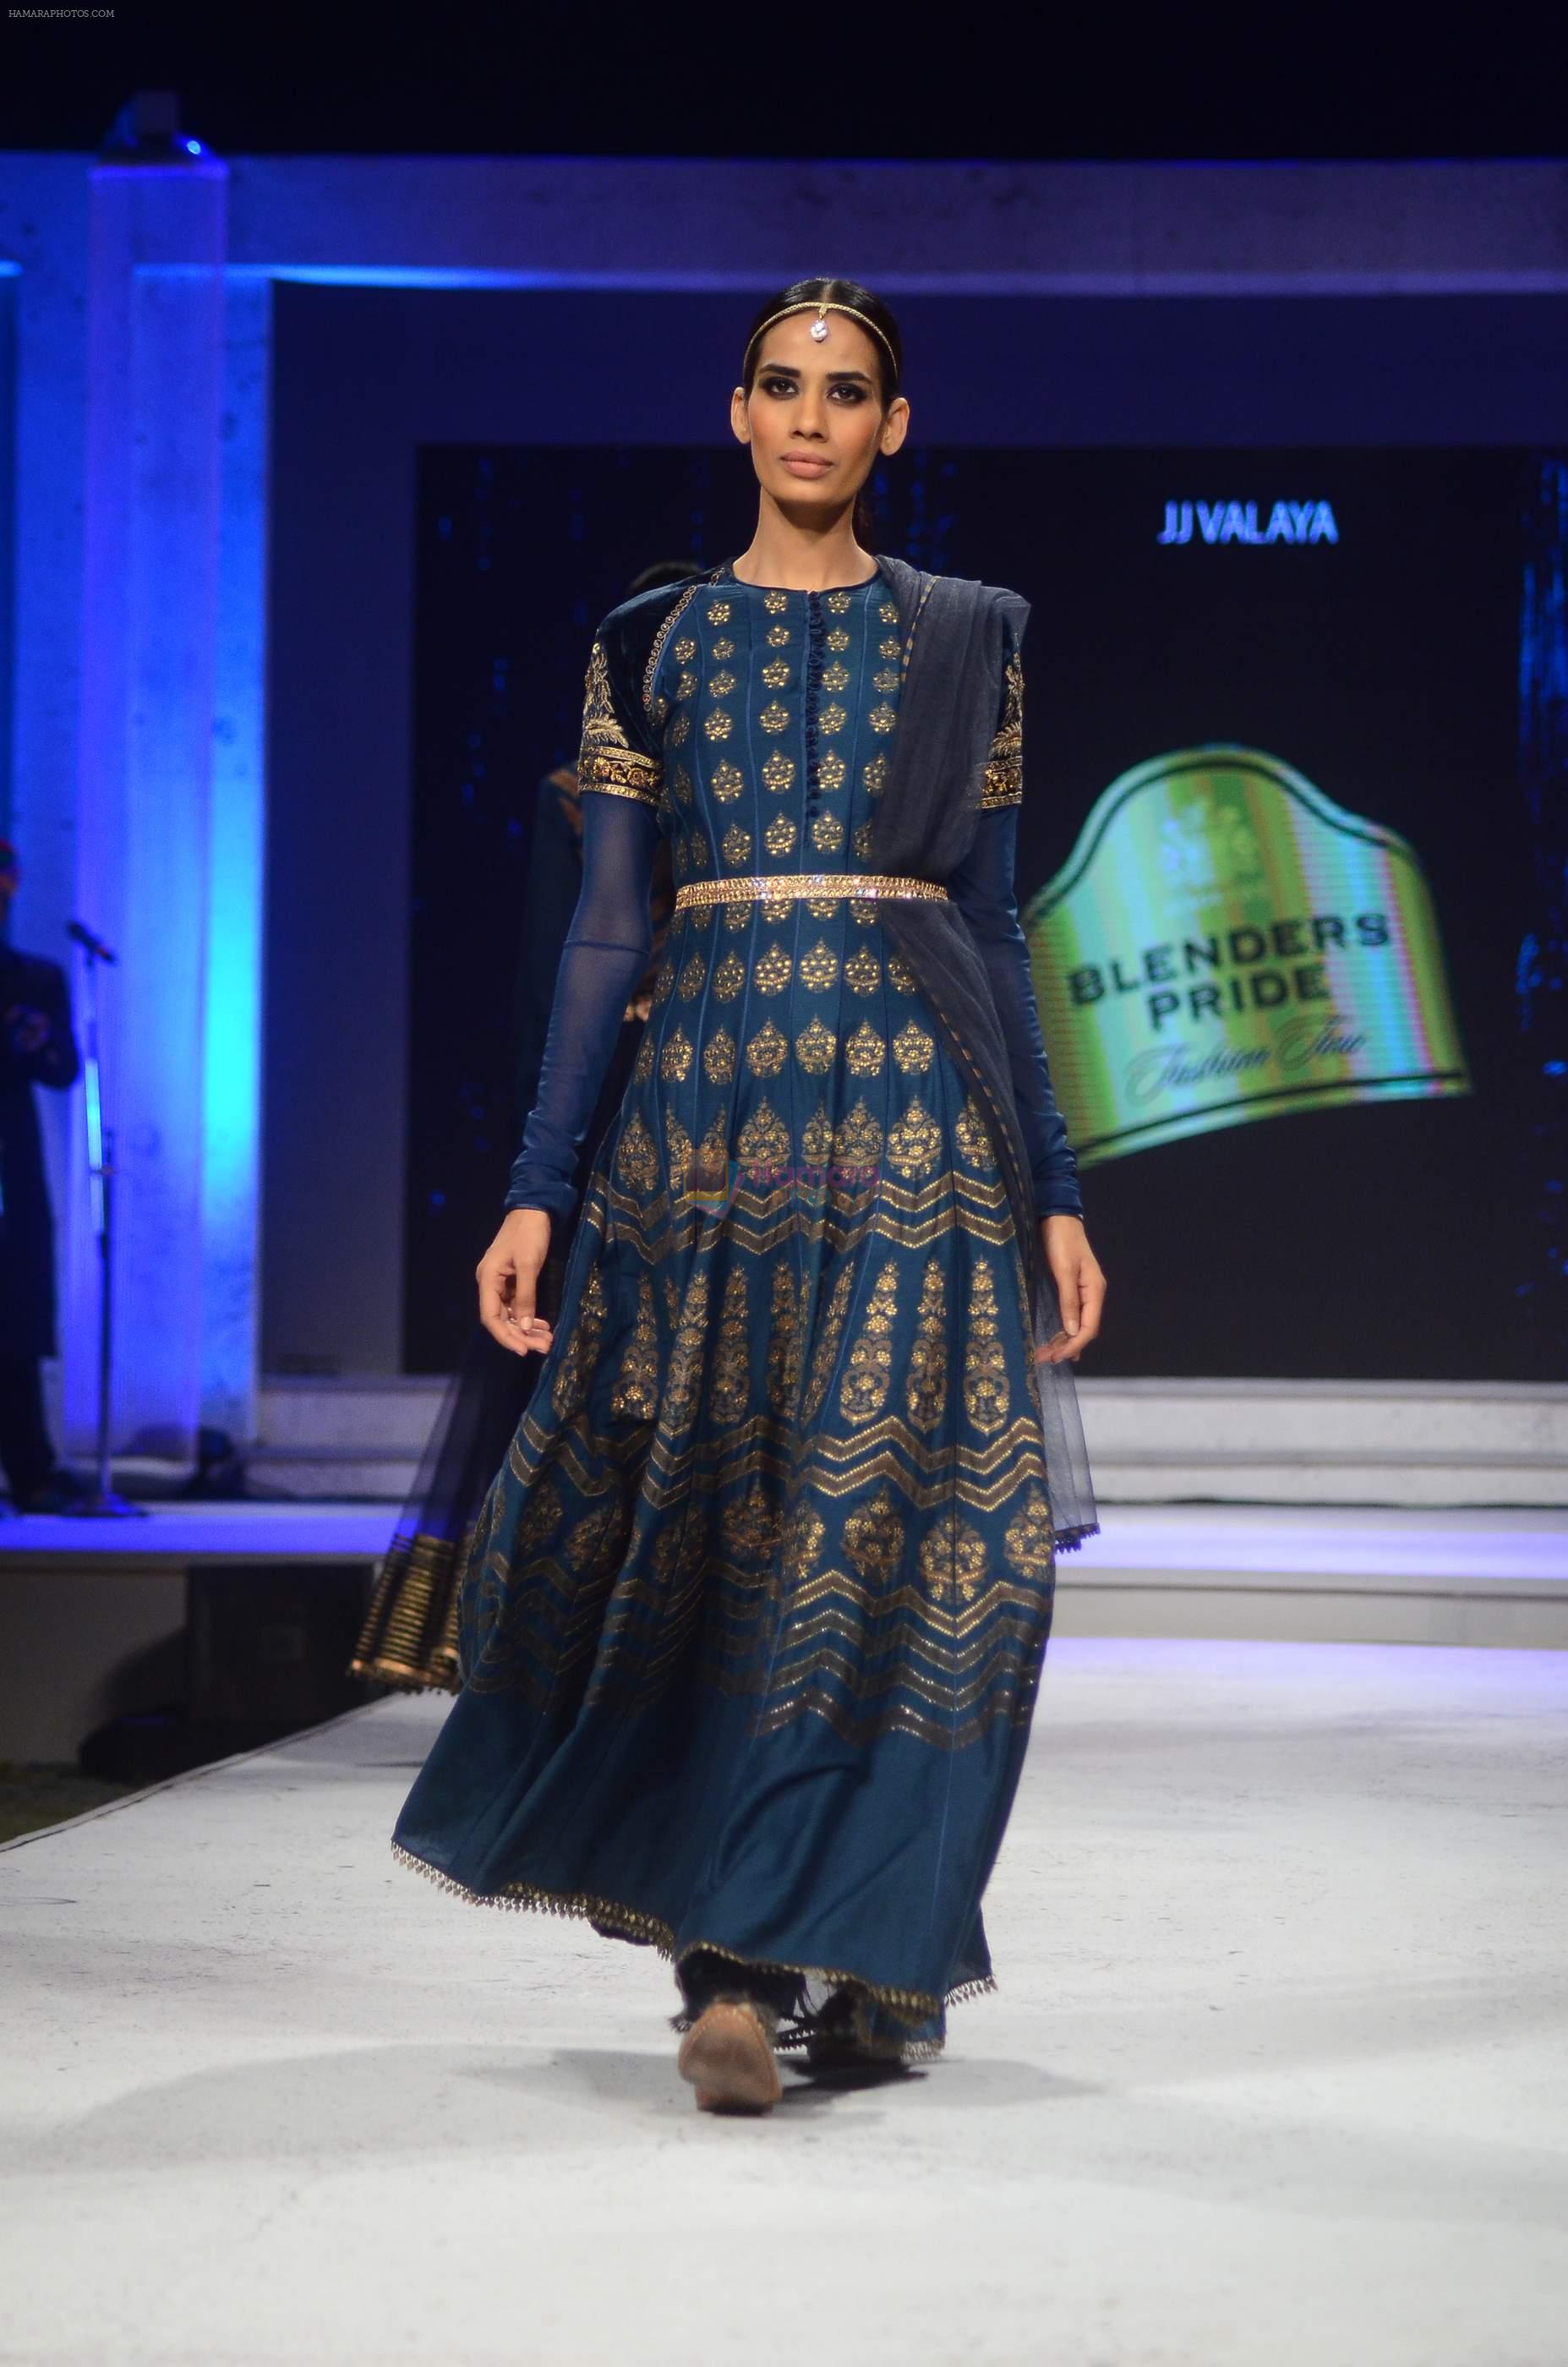 Model walk the ramp on day 1 of Blenders Pride Tour on 4th Dec 2015